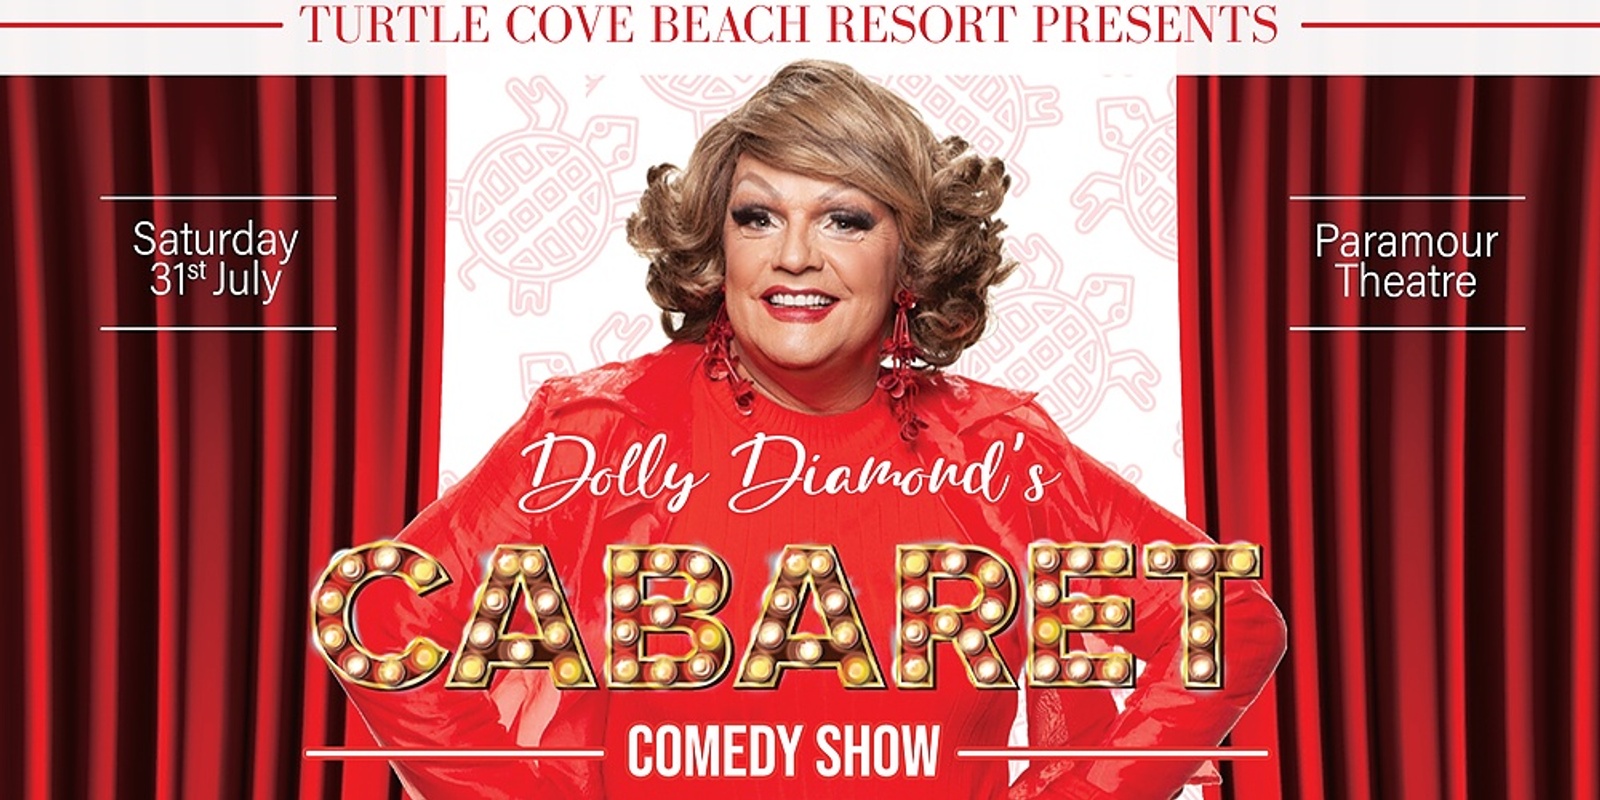 Banner image for Turtle Cove Beach Resort Presents; A NIGHT WITH DOLLY DIAMOND 